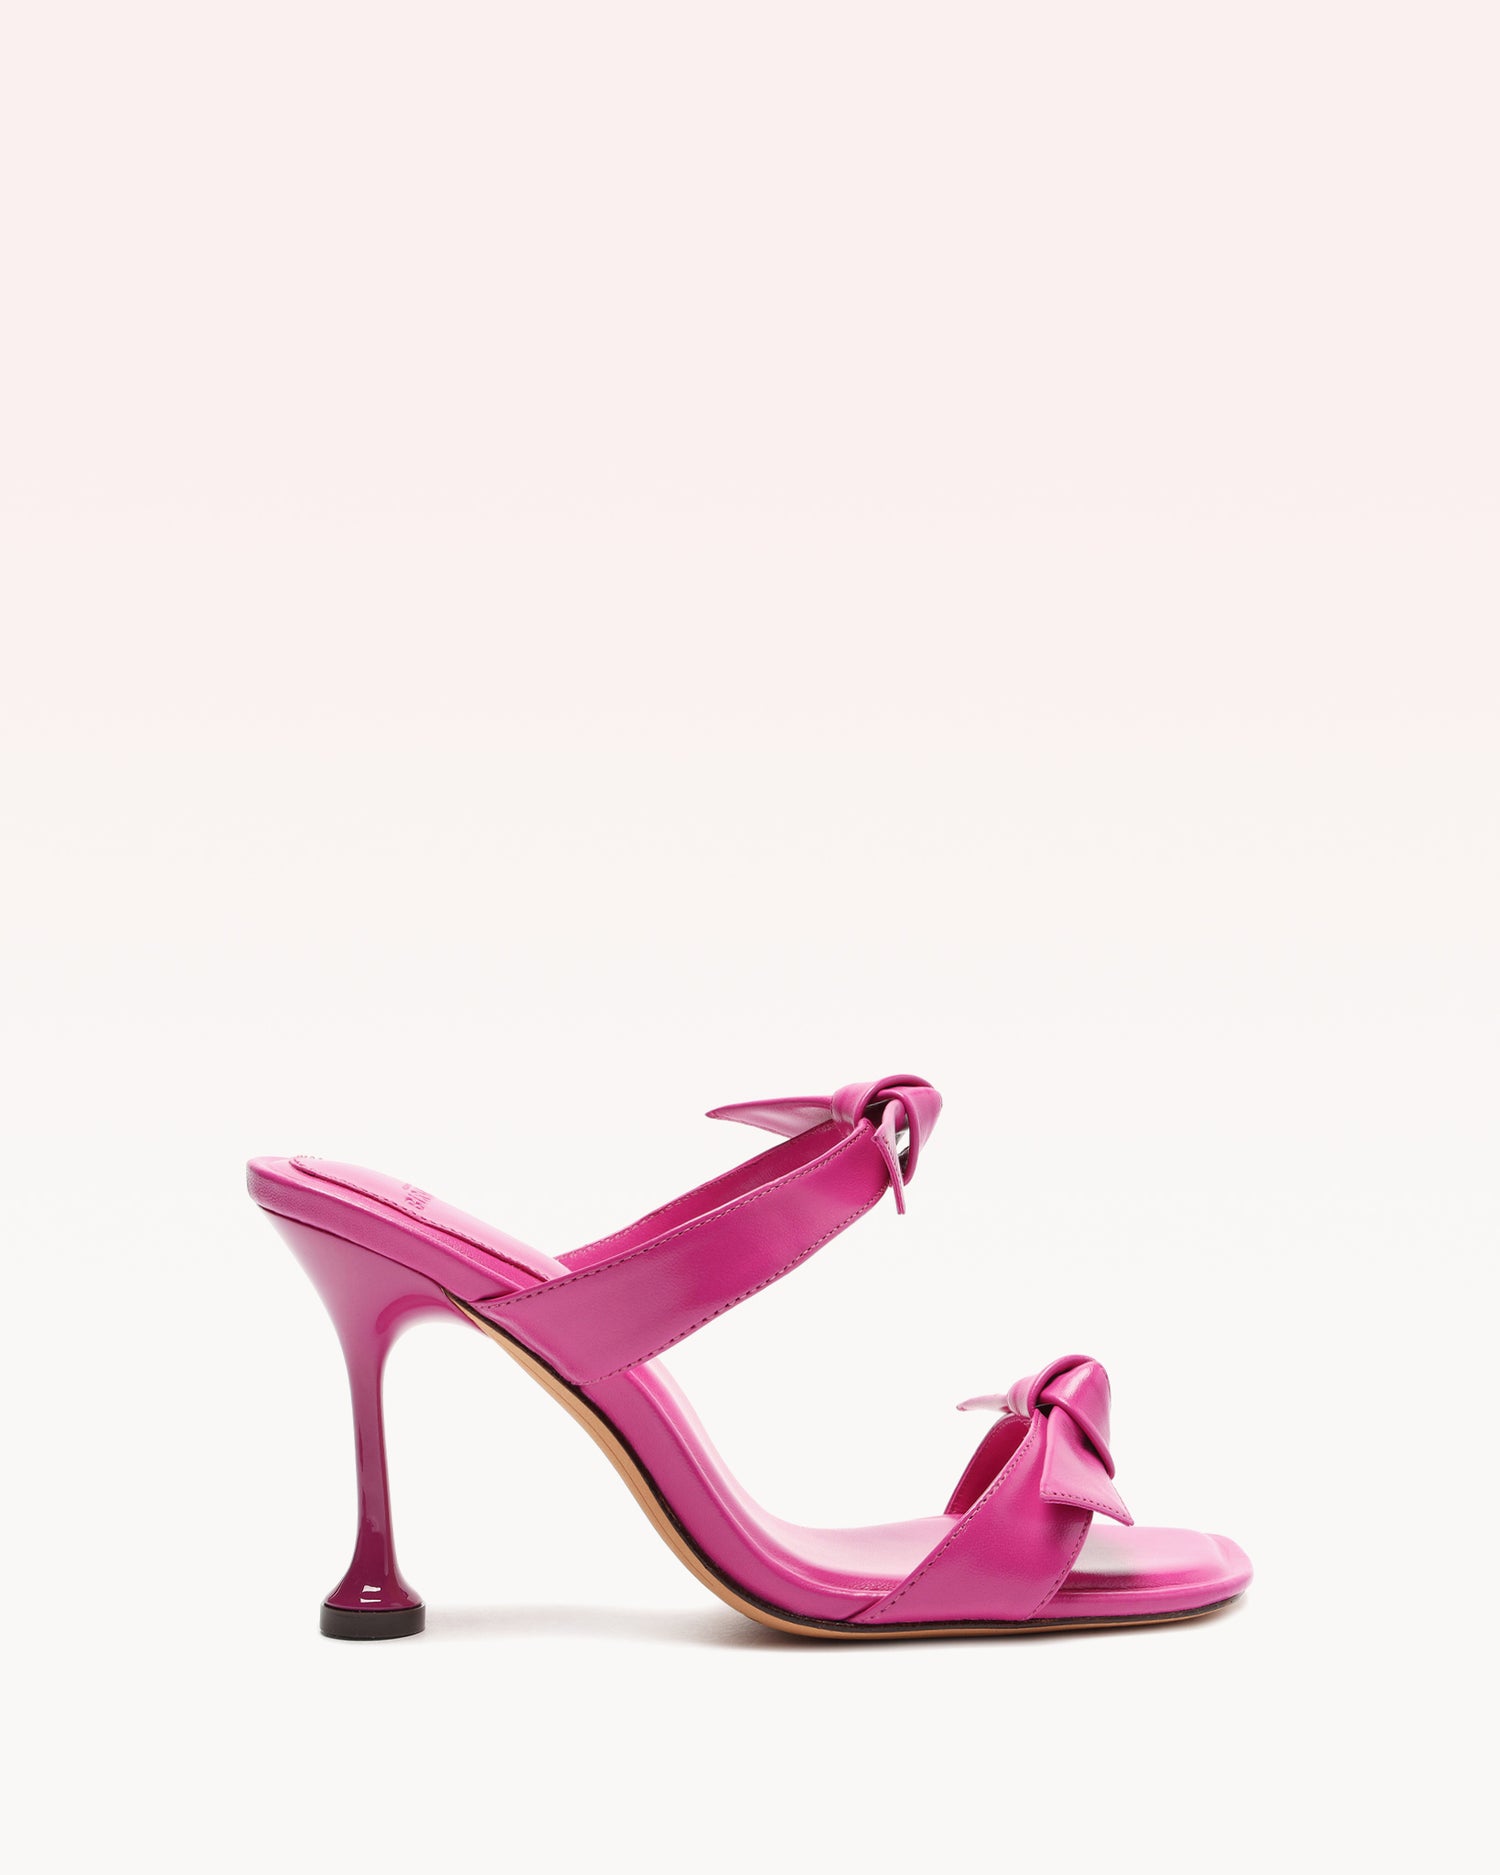 Clarita Square 85 Pink Sandals PRE FALL 23 35 PINK Nappa Leather